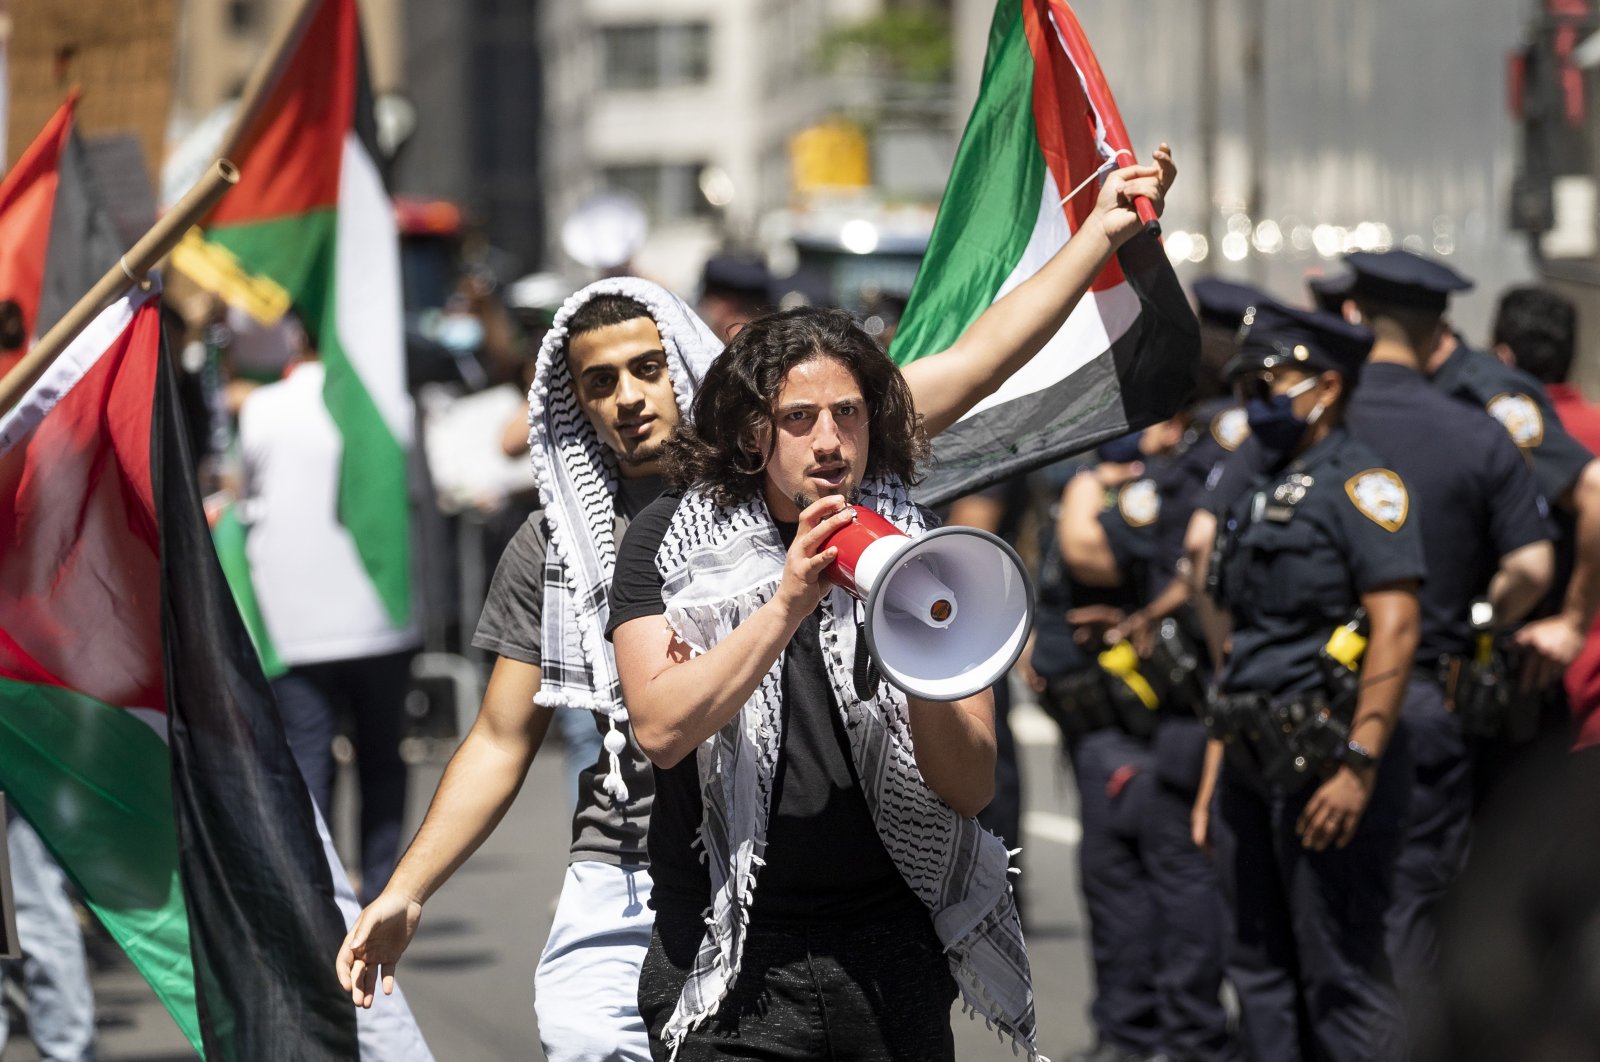 People attend a rally and march in support of Palestine near the Israeli consulate in New York City, U.S., May 18, 2021. (EPA-EFE Photo)